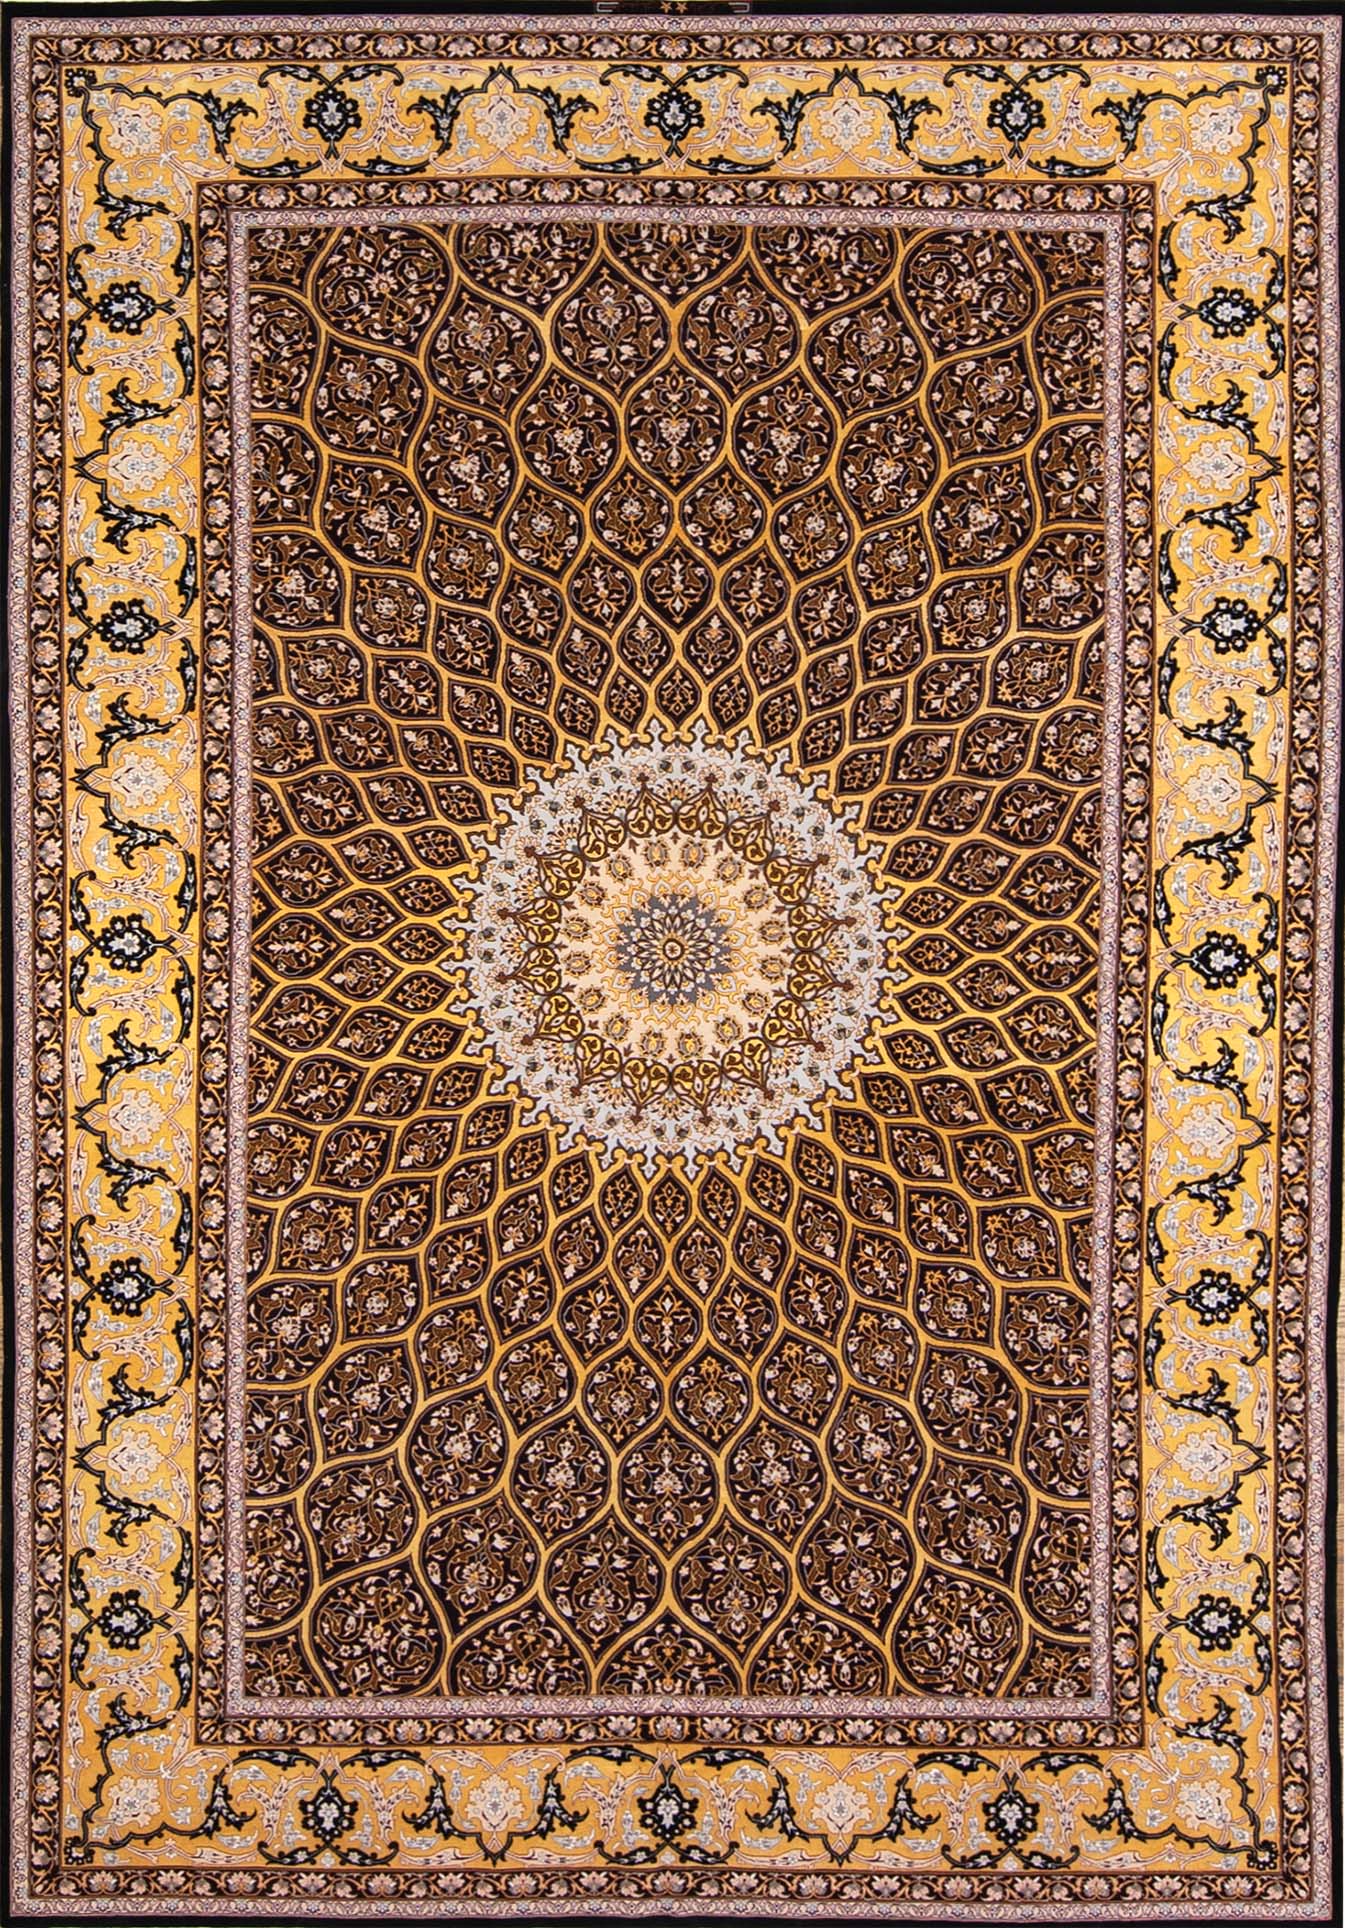 Persian purple rug. Hand knotted Persian Isfahan rug with mandala design in purple and gold colors made of kork wool and silk. Size 6.8x10.3.